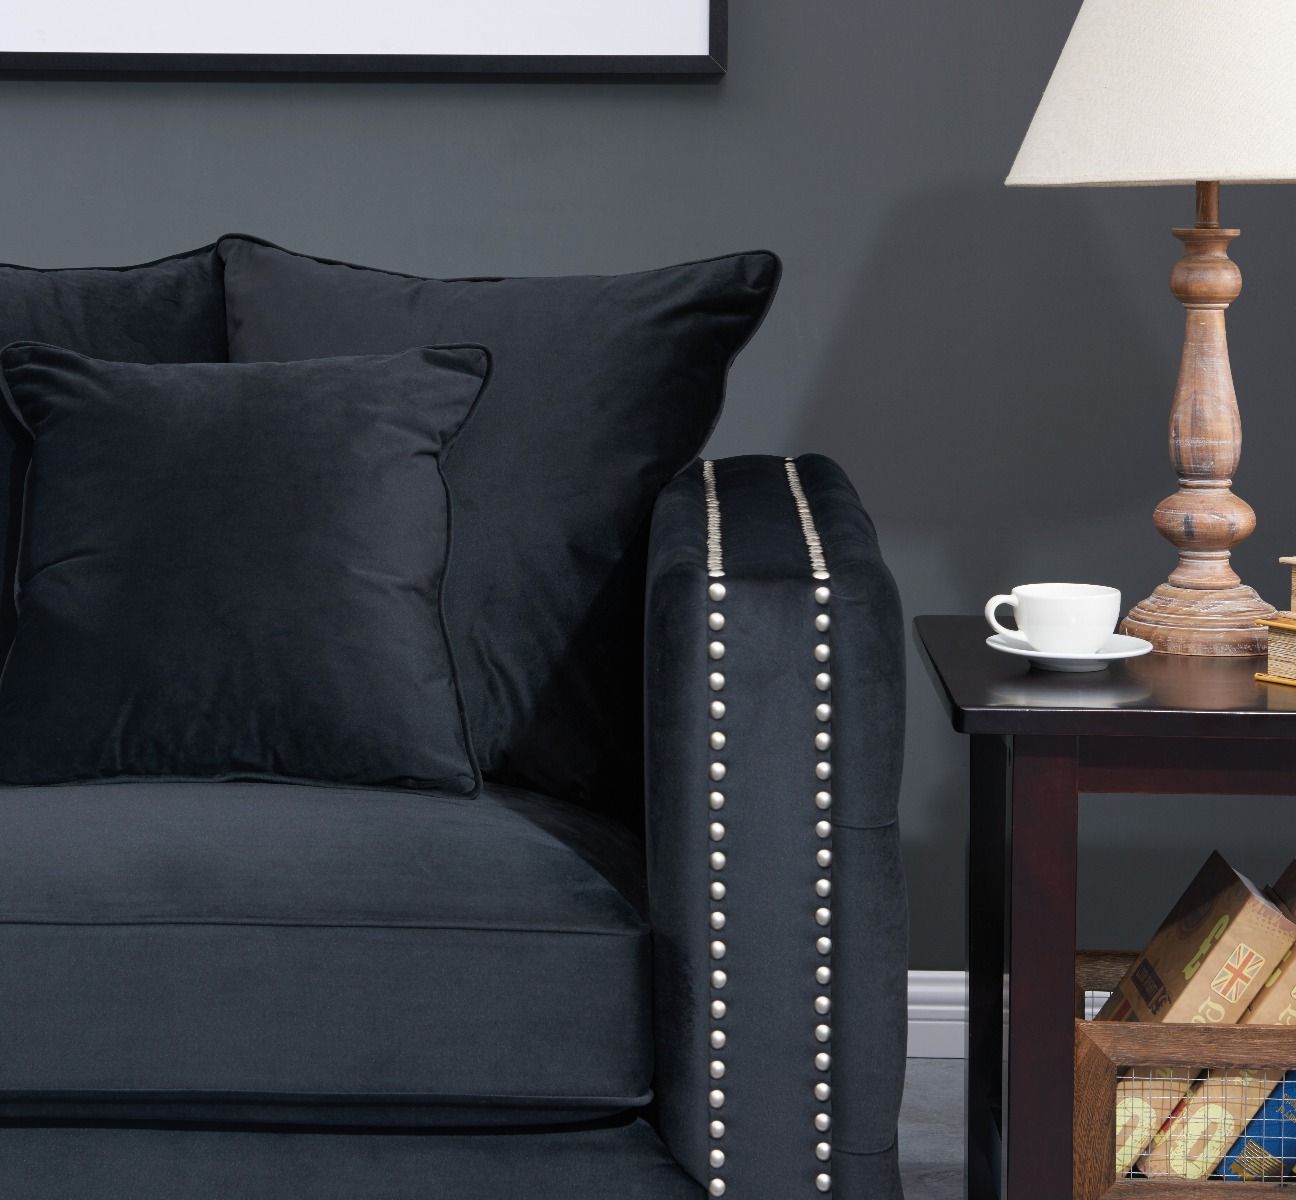 Moscow Snuggle Chair Black